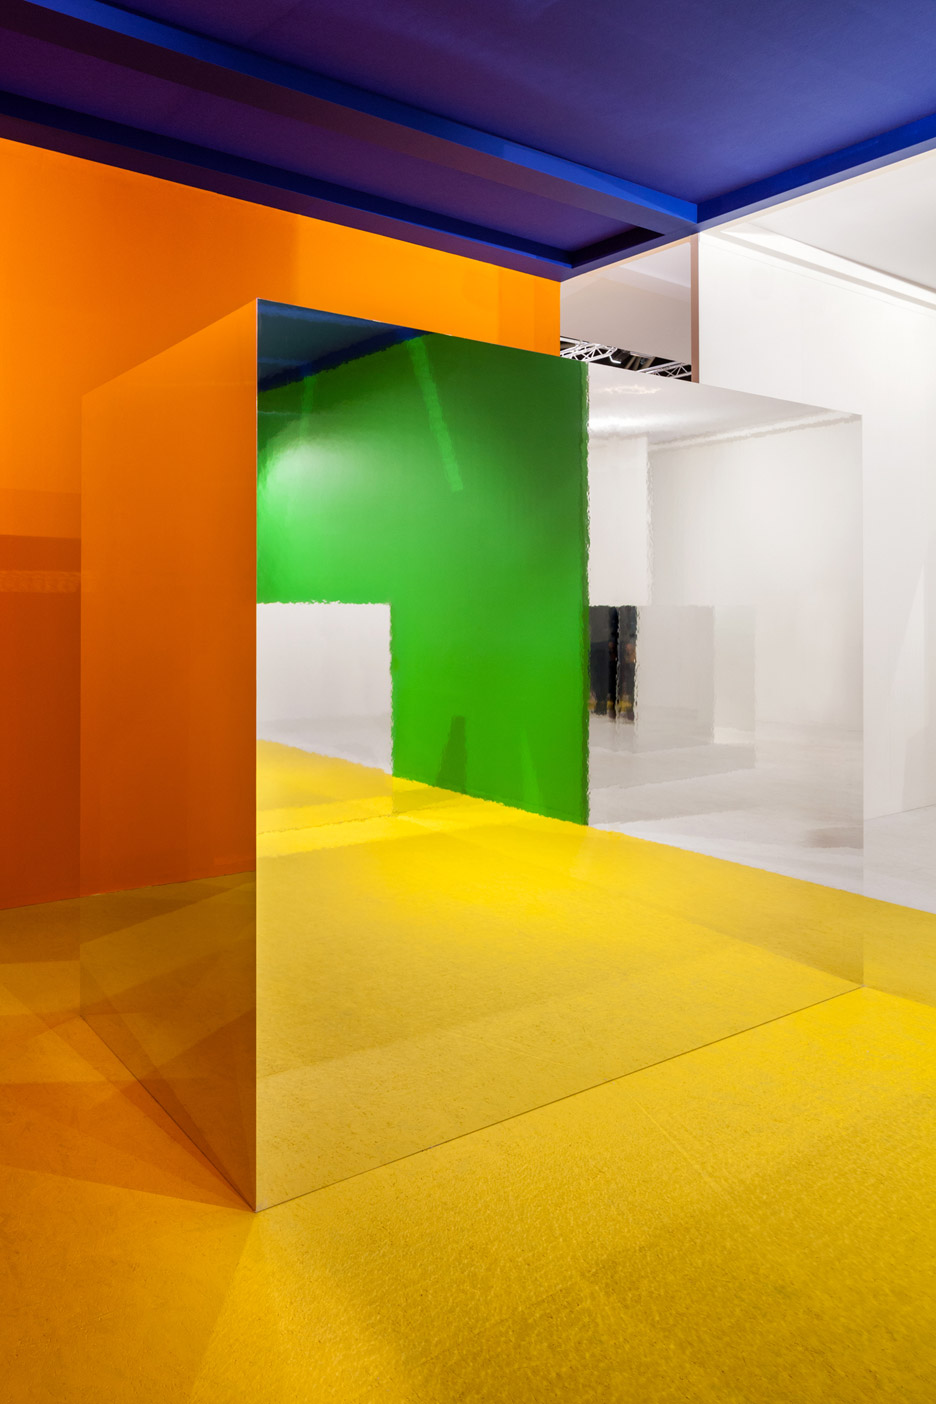 I29 Uses Multicoloured Walls And Mirrored Volumes To Create Temporary Exhibition Space